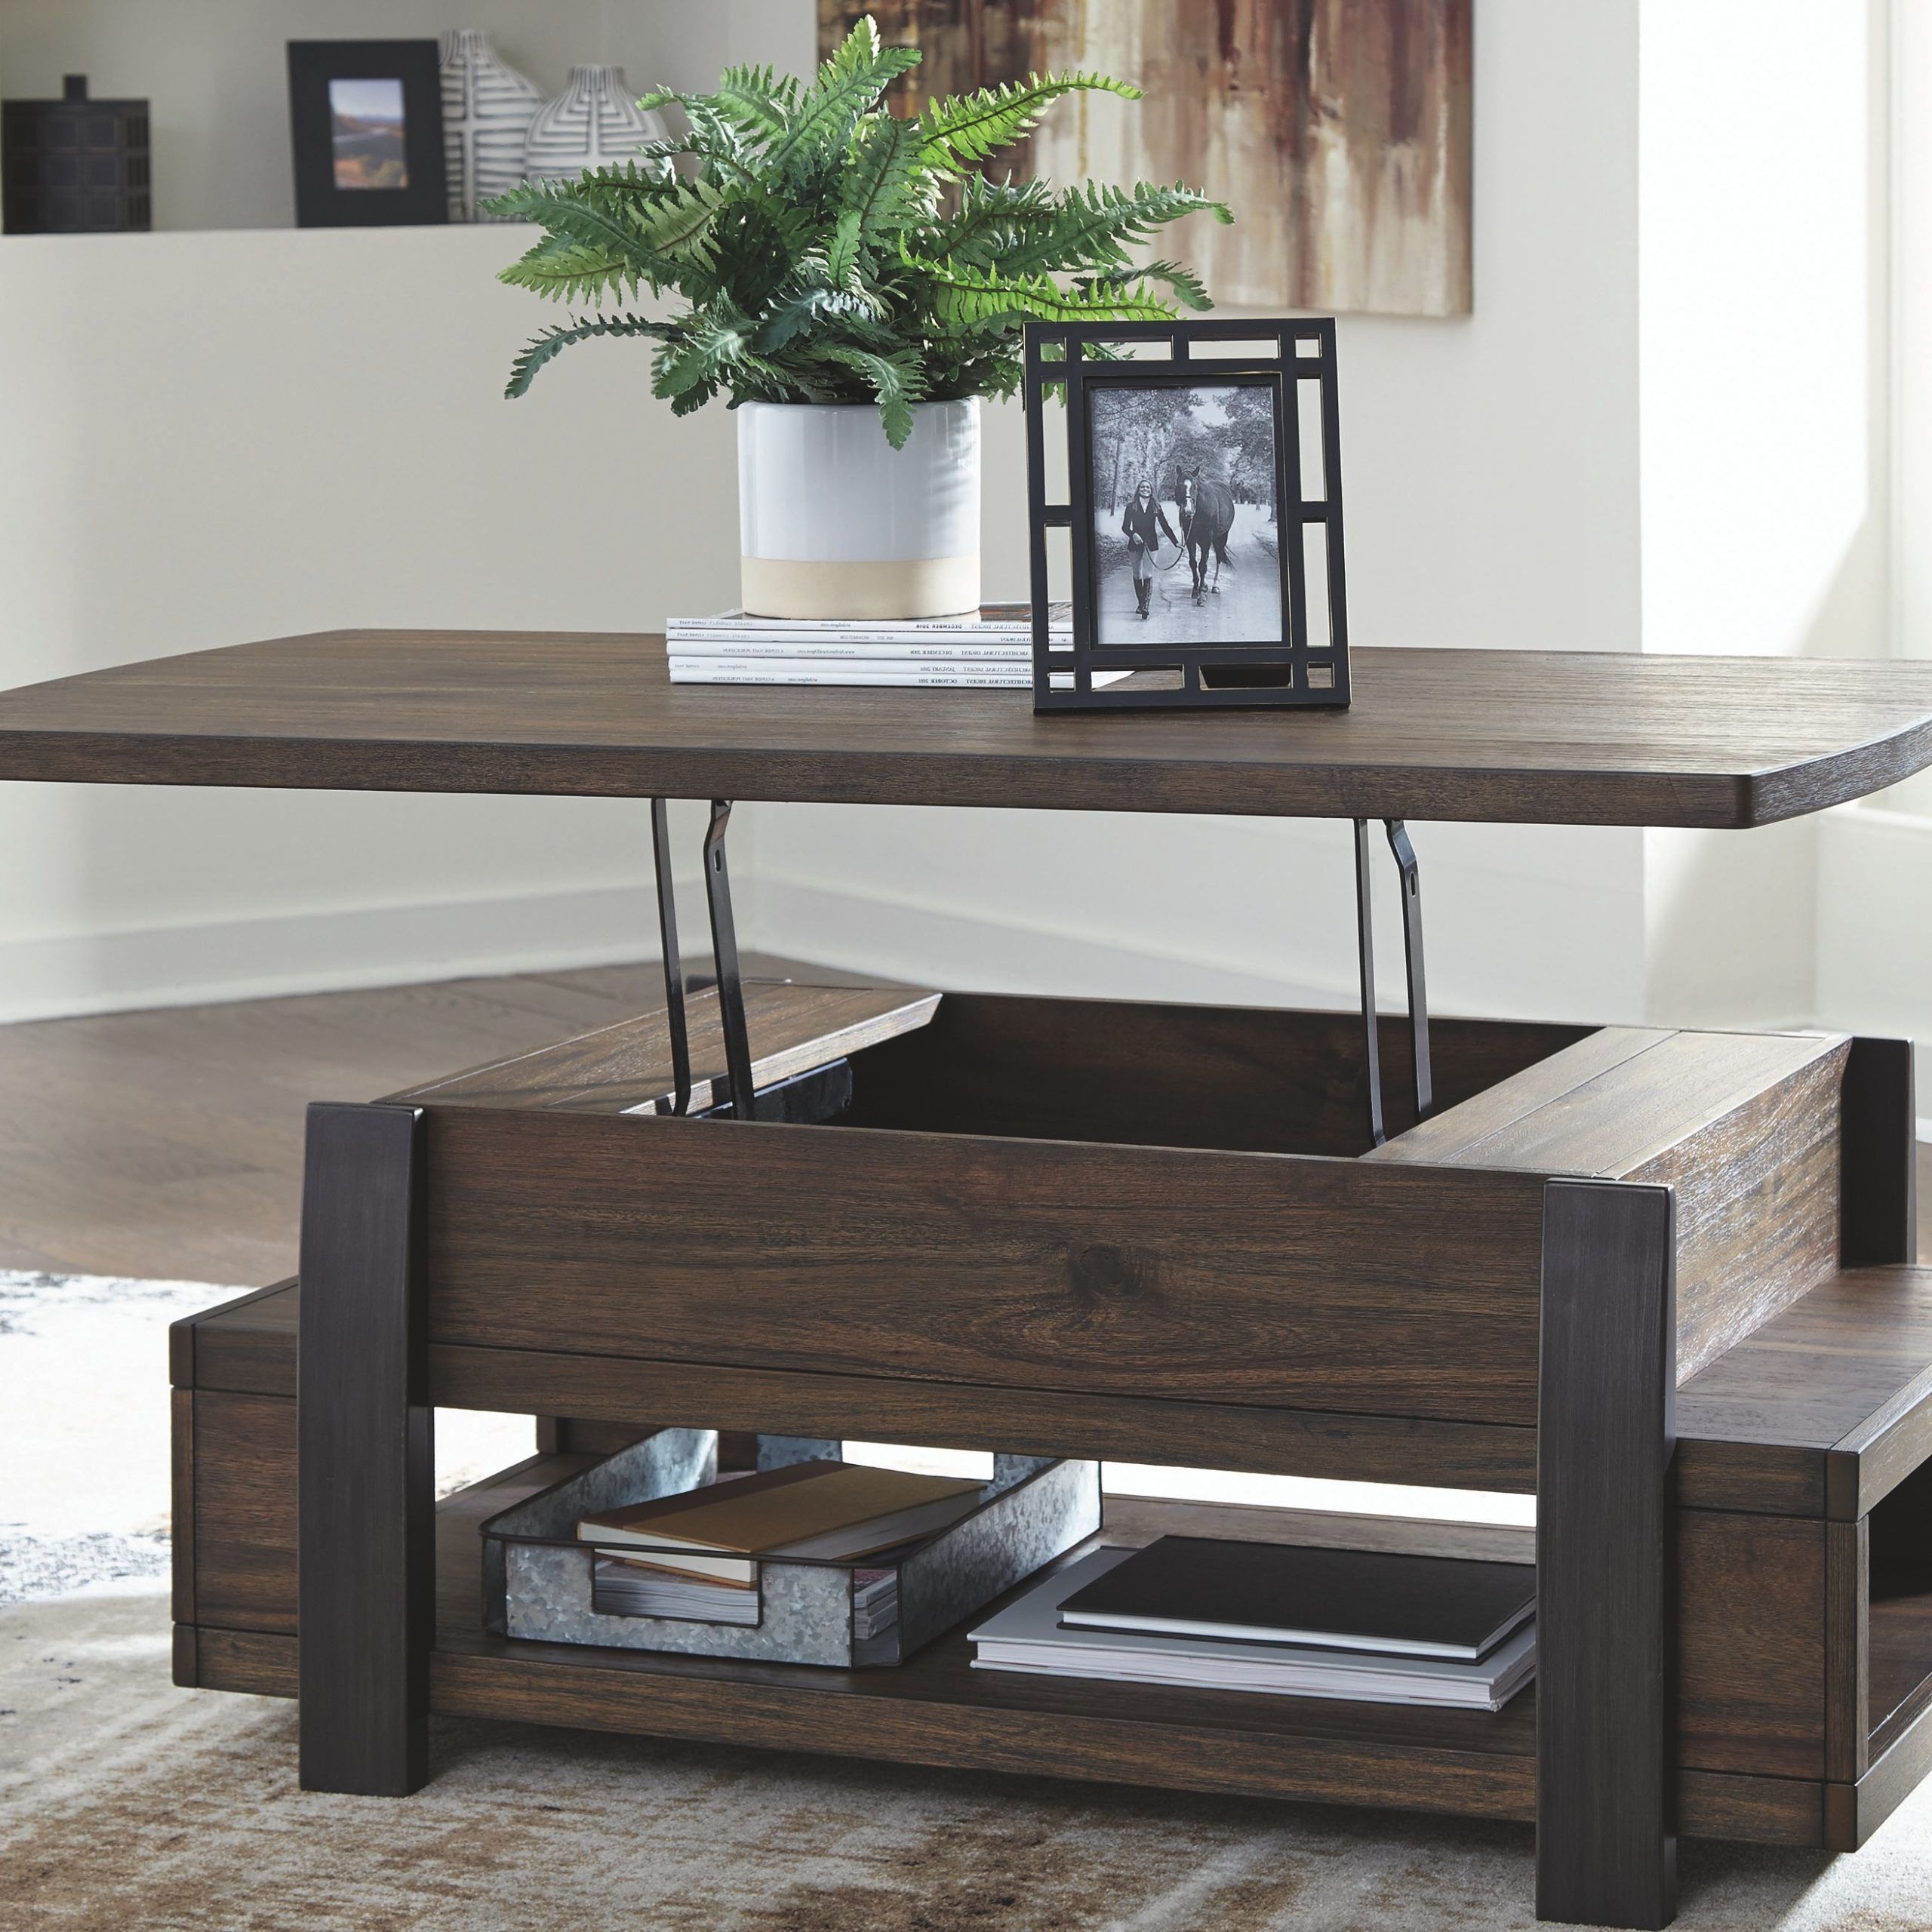 Vailbry Coffee Table With Lift Top, Brown (View 5 of 15)